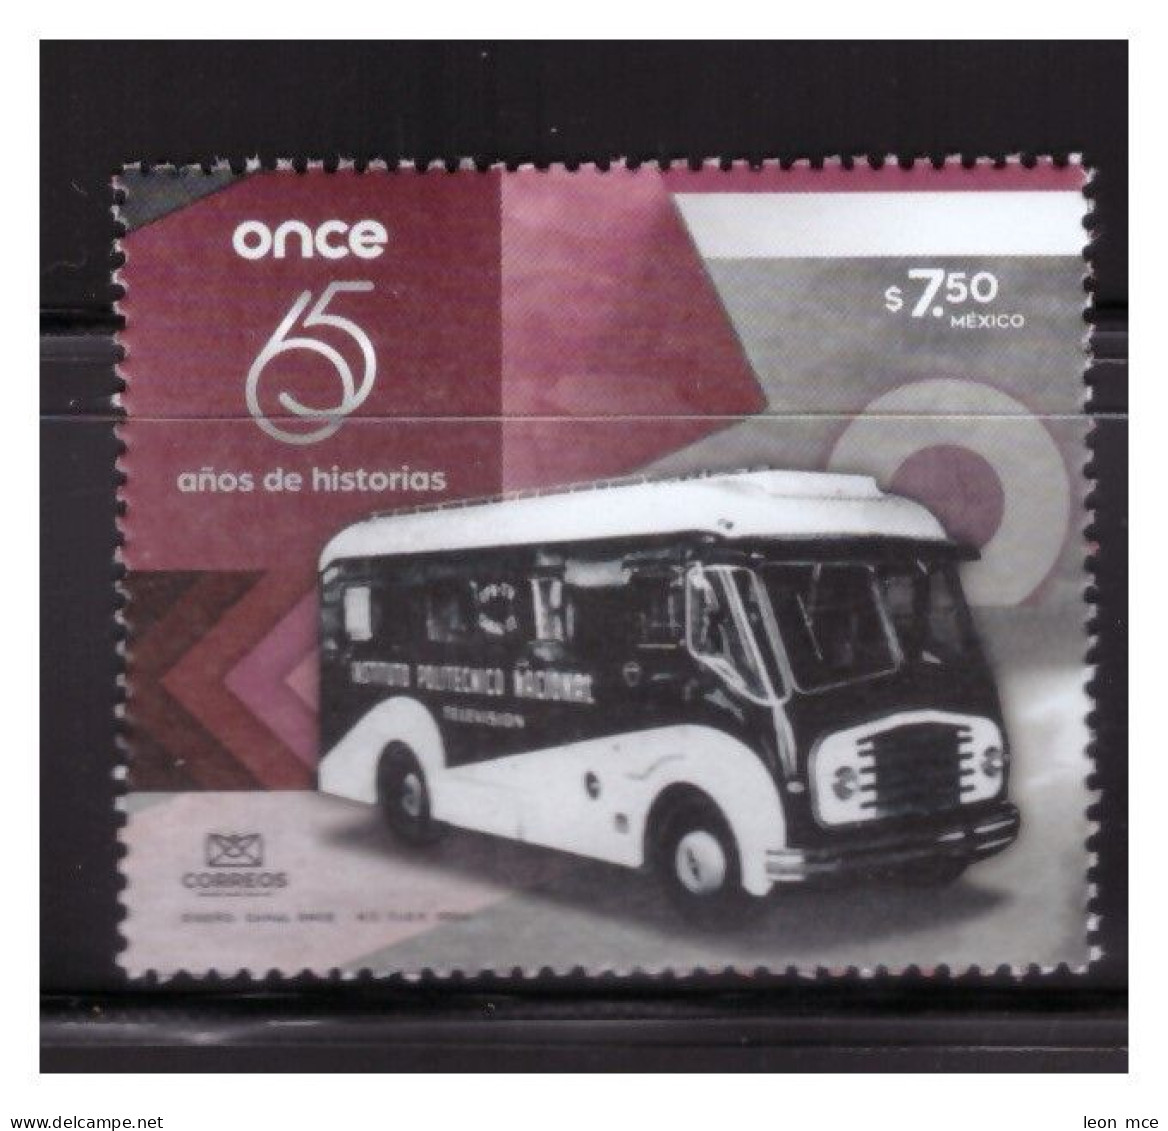 2024 MÉXICO Once. 65 Años De Historias, MNH Channel Eleven. TV, 65 Years Of Stories, COMMUNICATIONS, TRUCK - Mexico